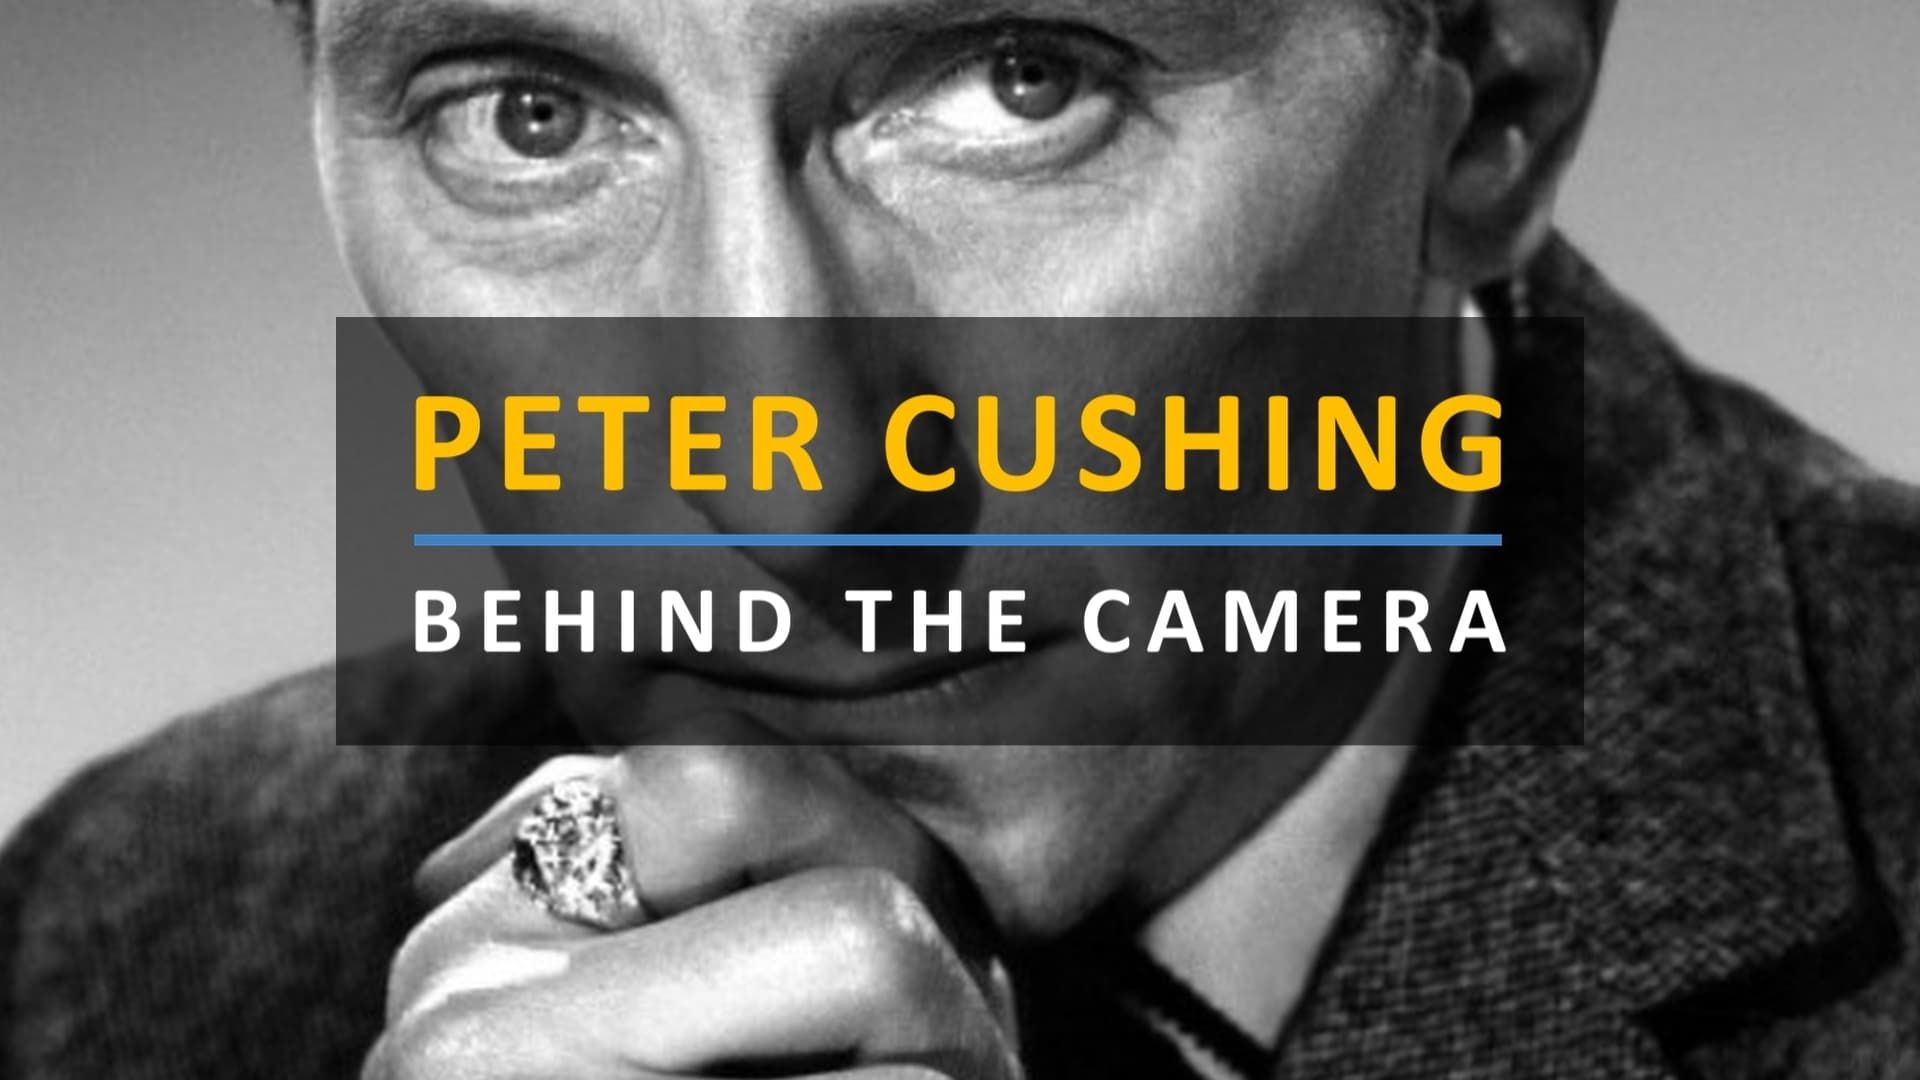 Peter Cushing Behind the Camera background